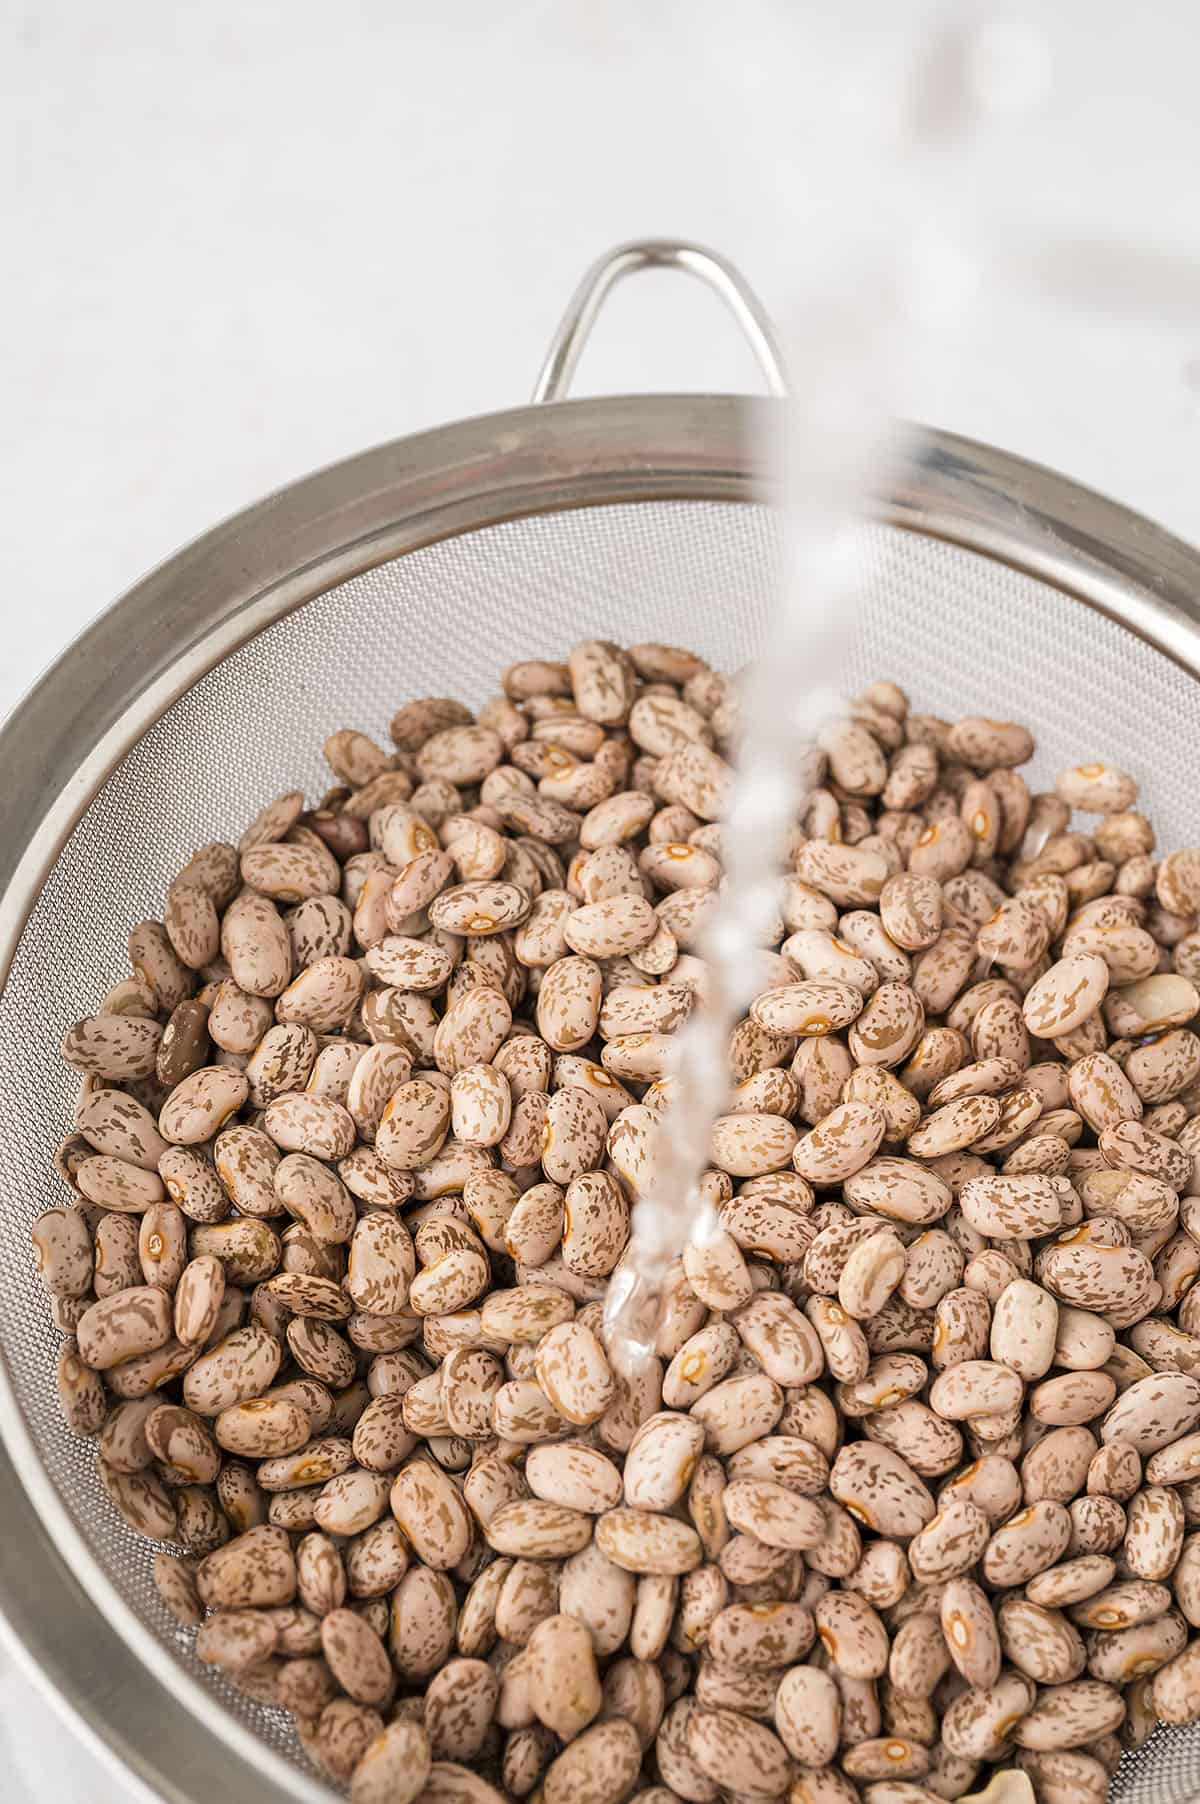 Beans in a colander with water running over them.